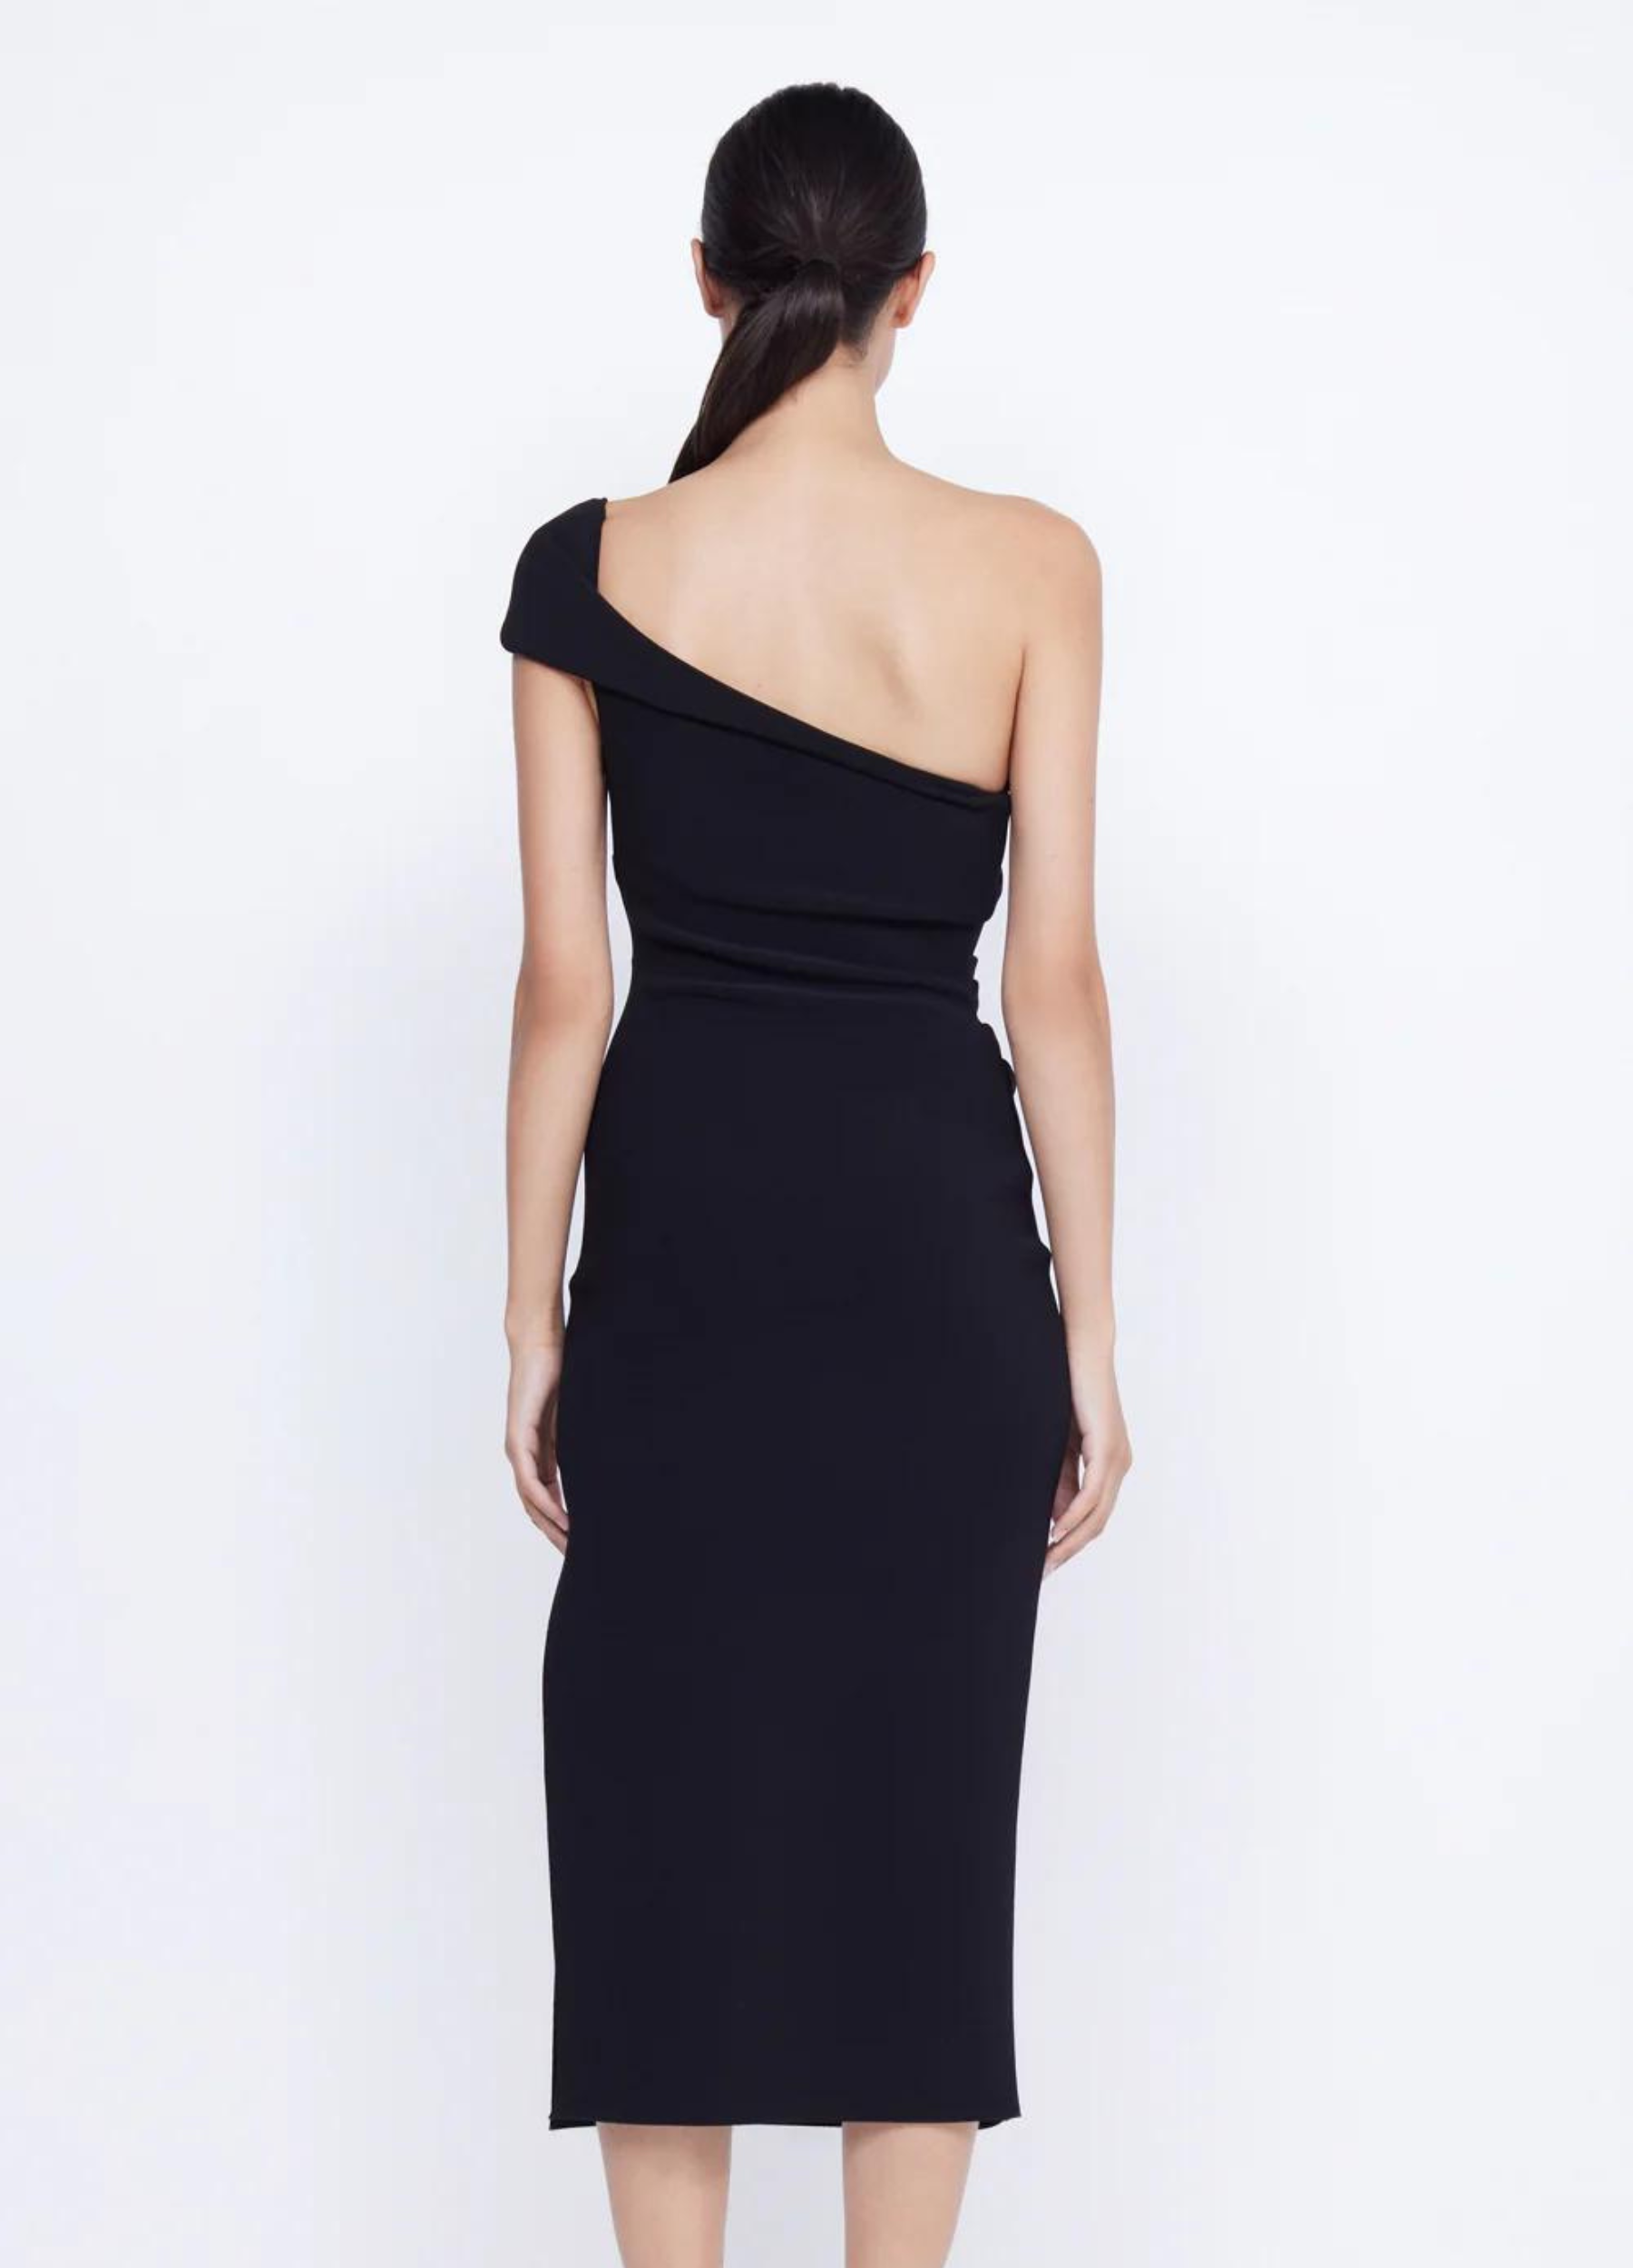 Black bonded crepe midi dress with twisted front and side tuck detailing